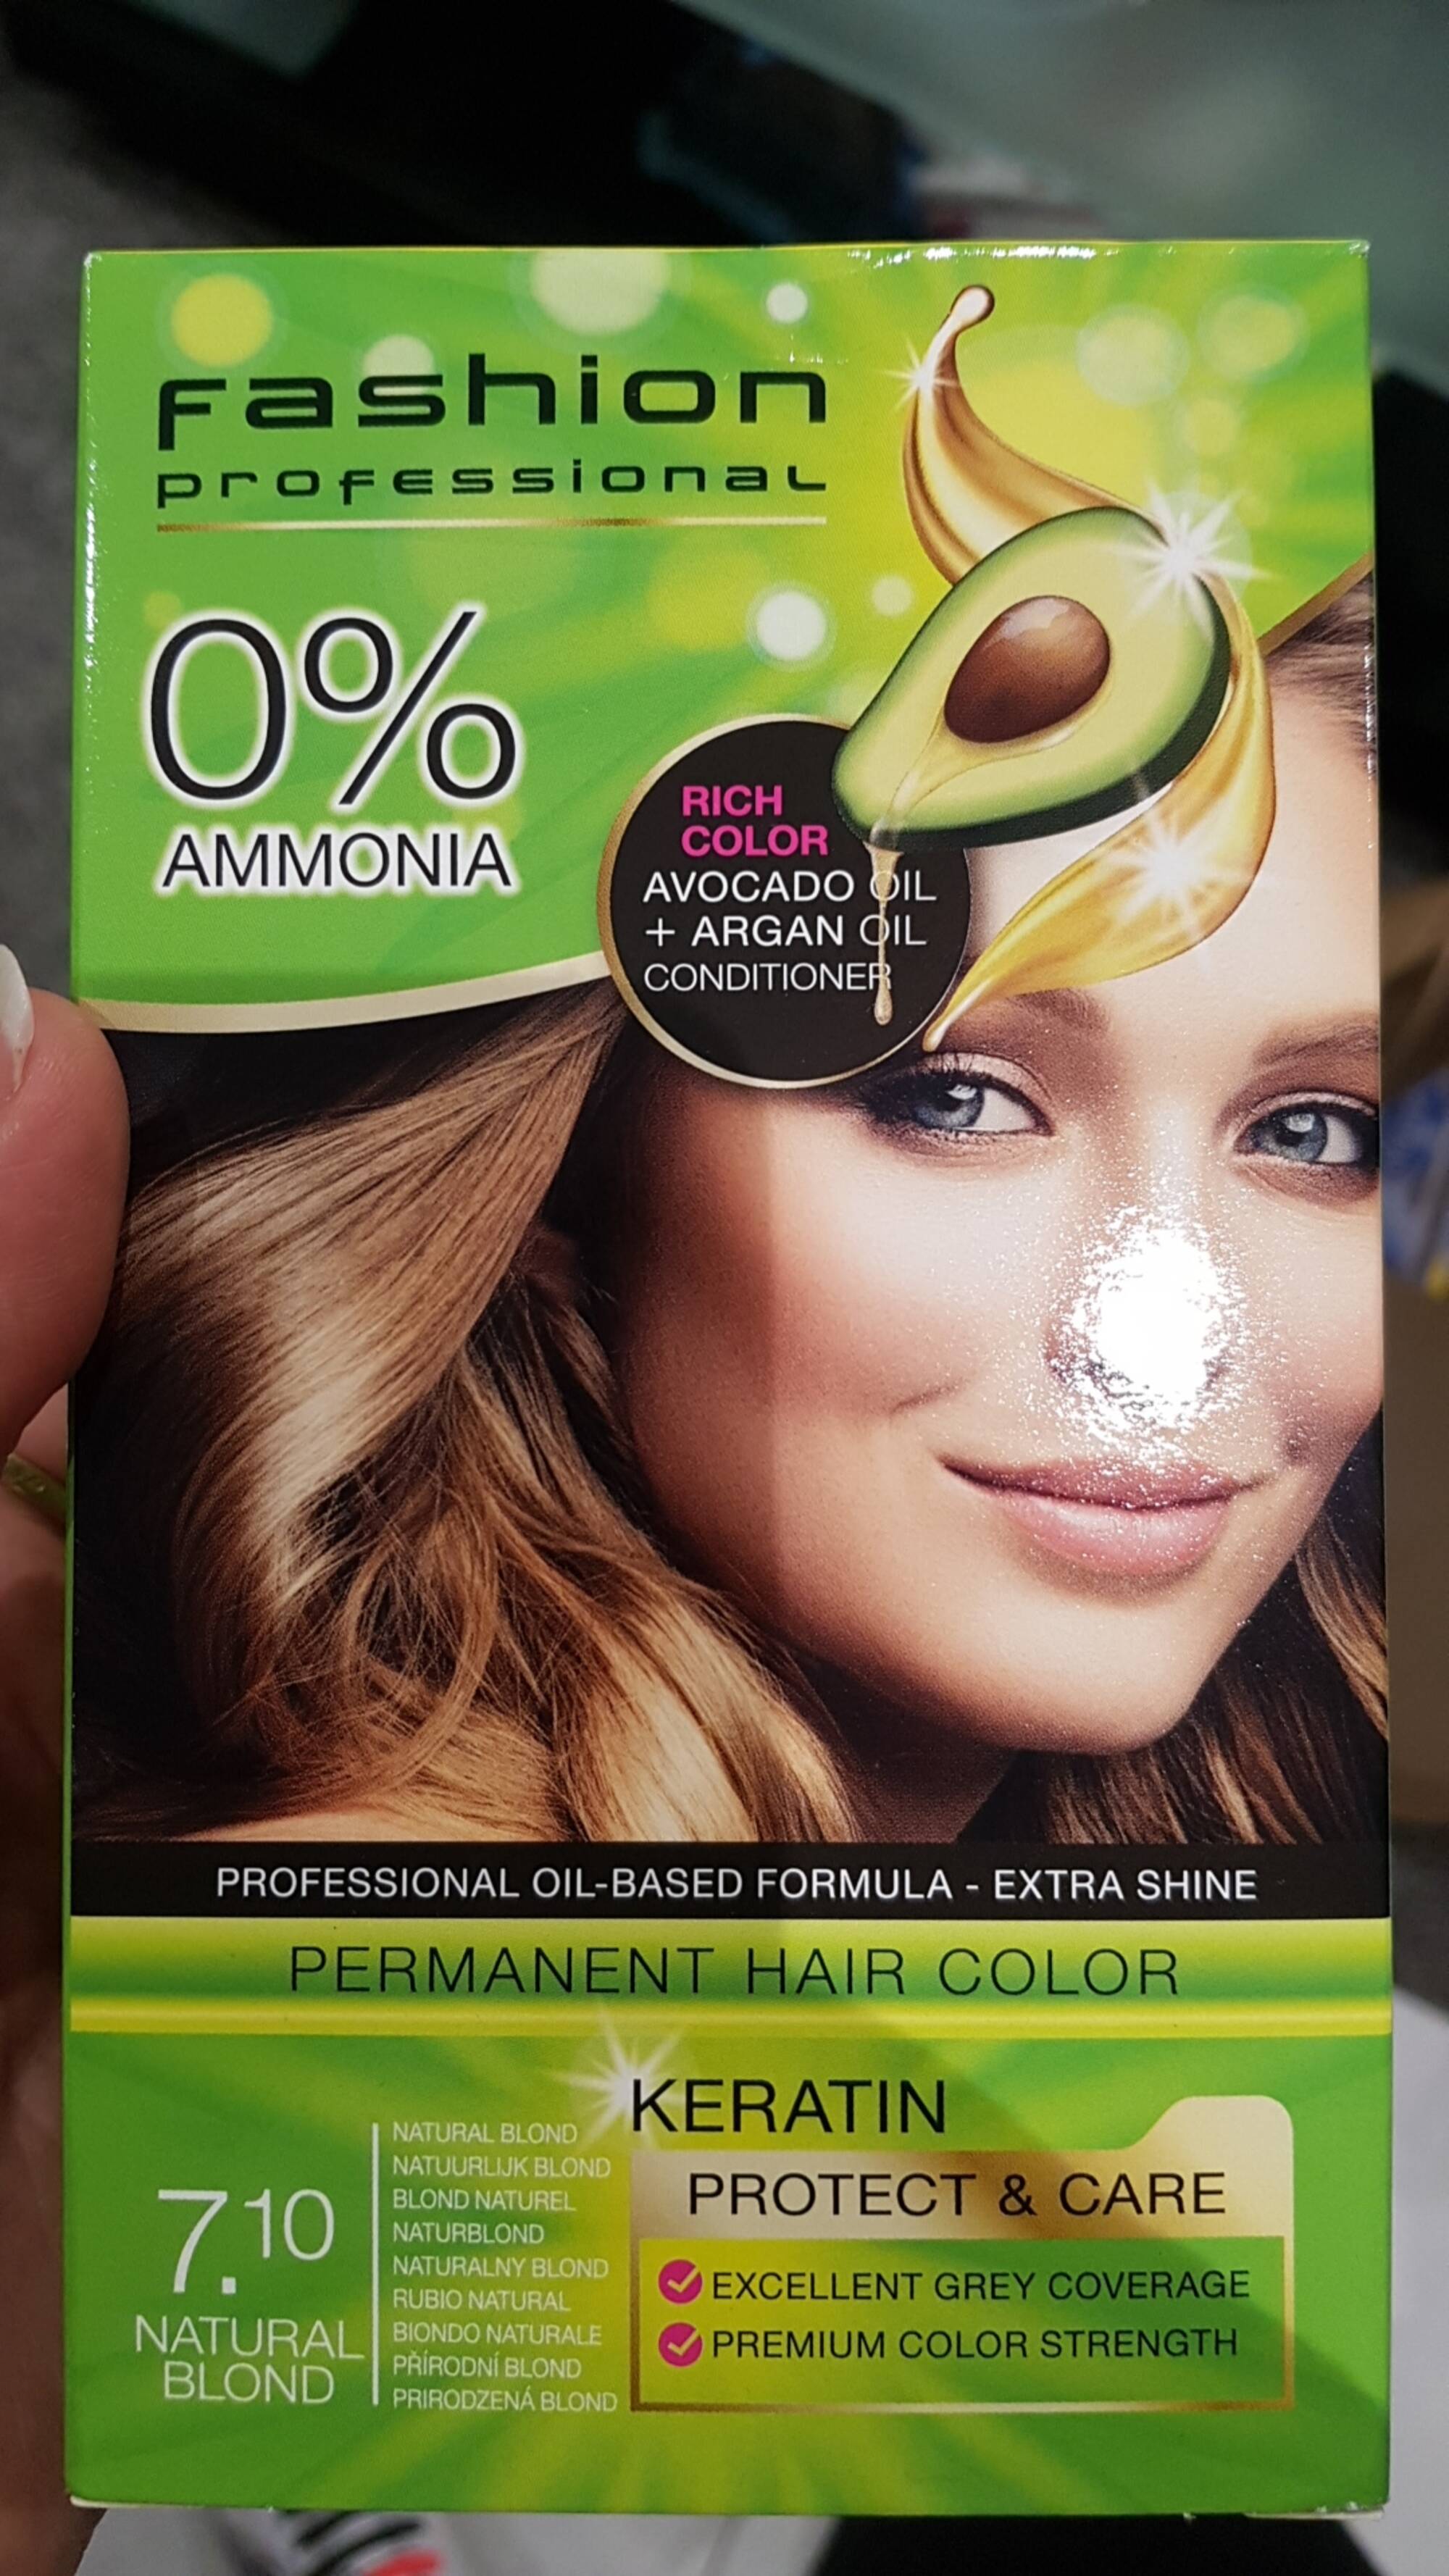 FASHION PROFESSIONAL - 0% Ammonia Permanent hair color 7.10 natural blond